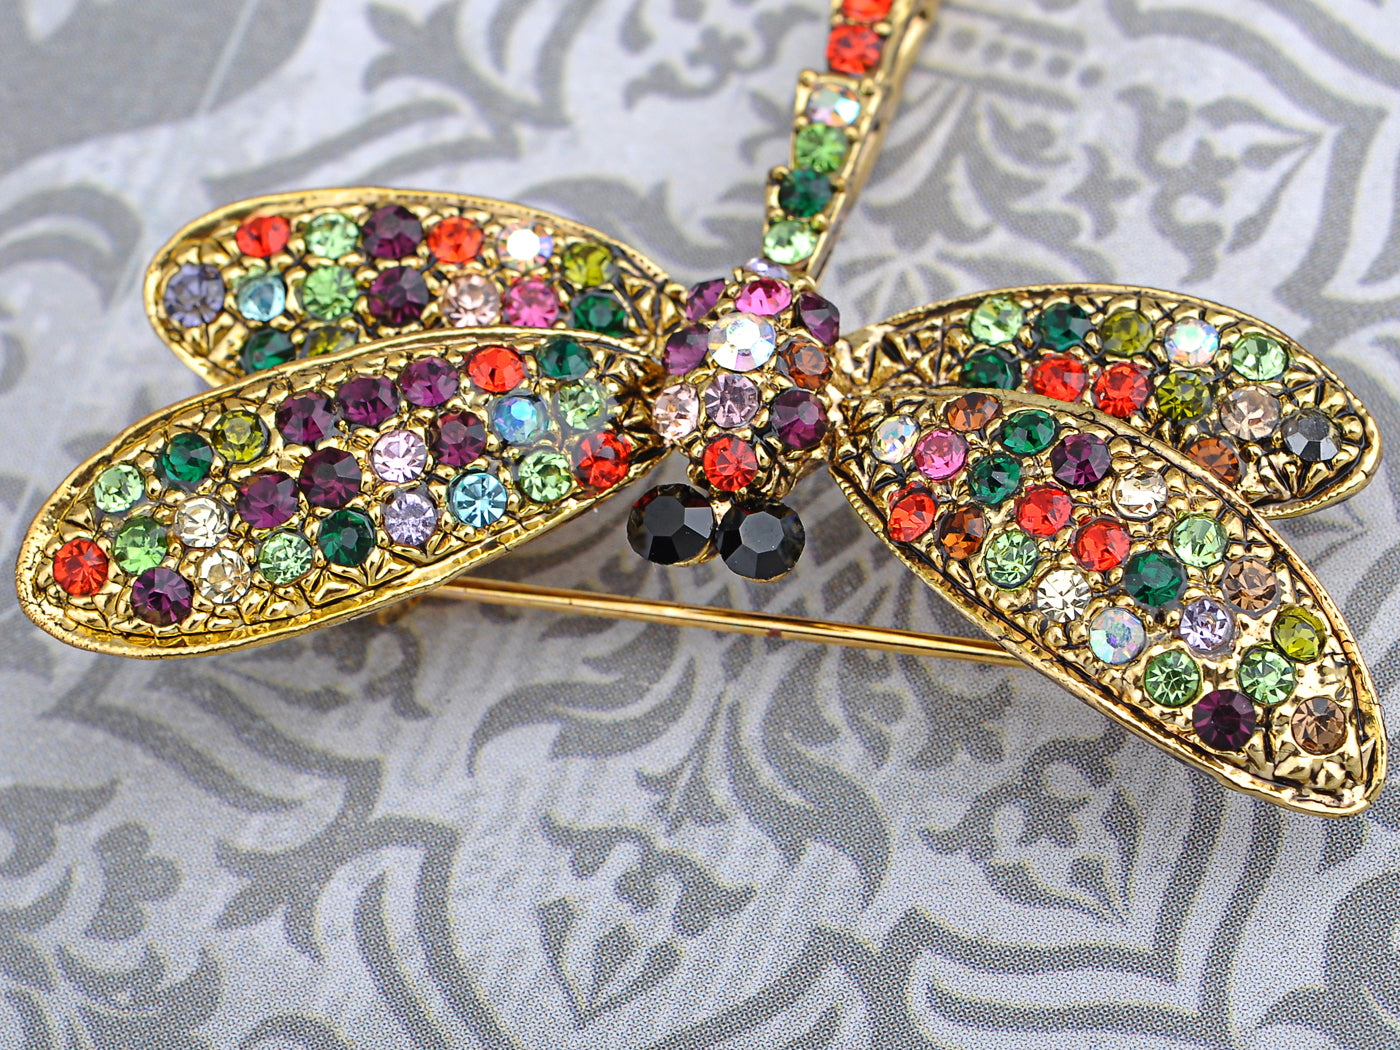 Petite Colorful Rainbow Pride Flying Dragonfly Pin Brooch